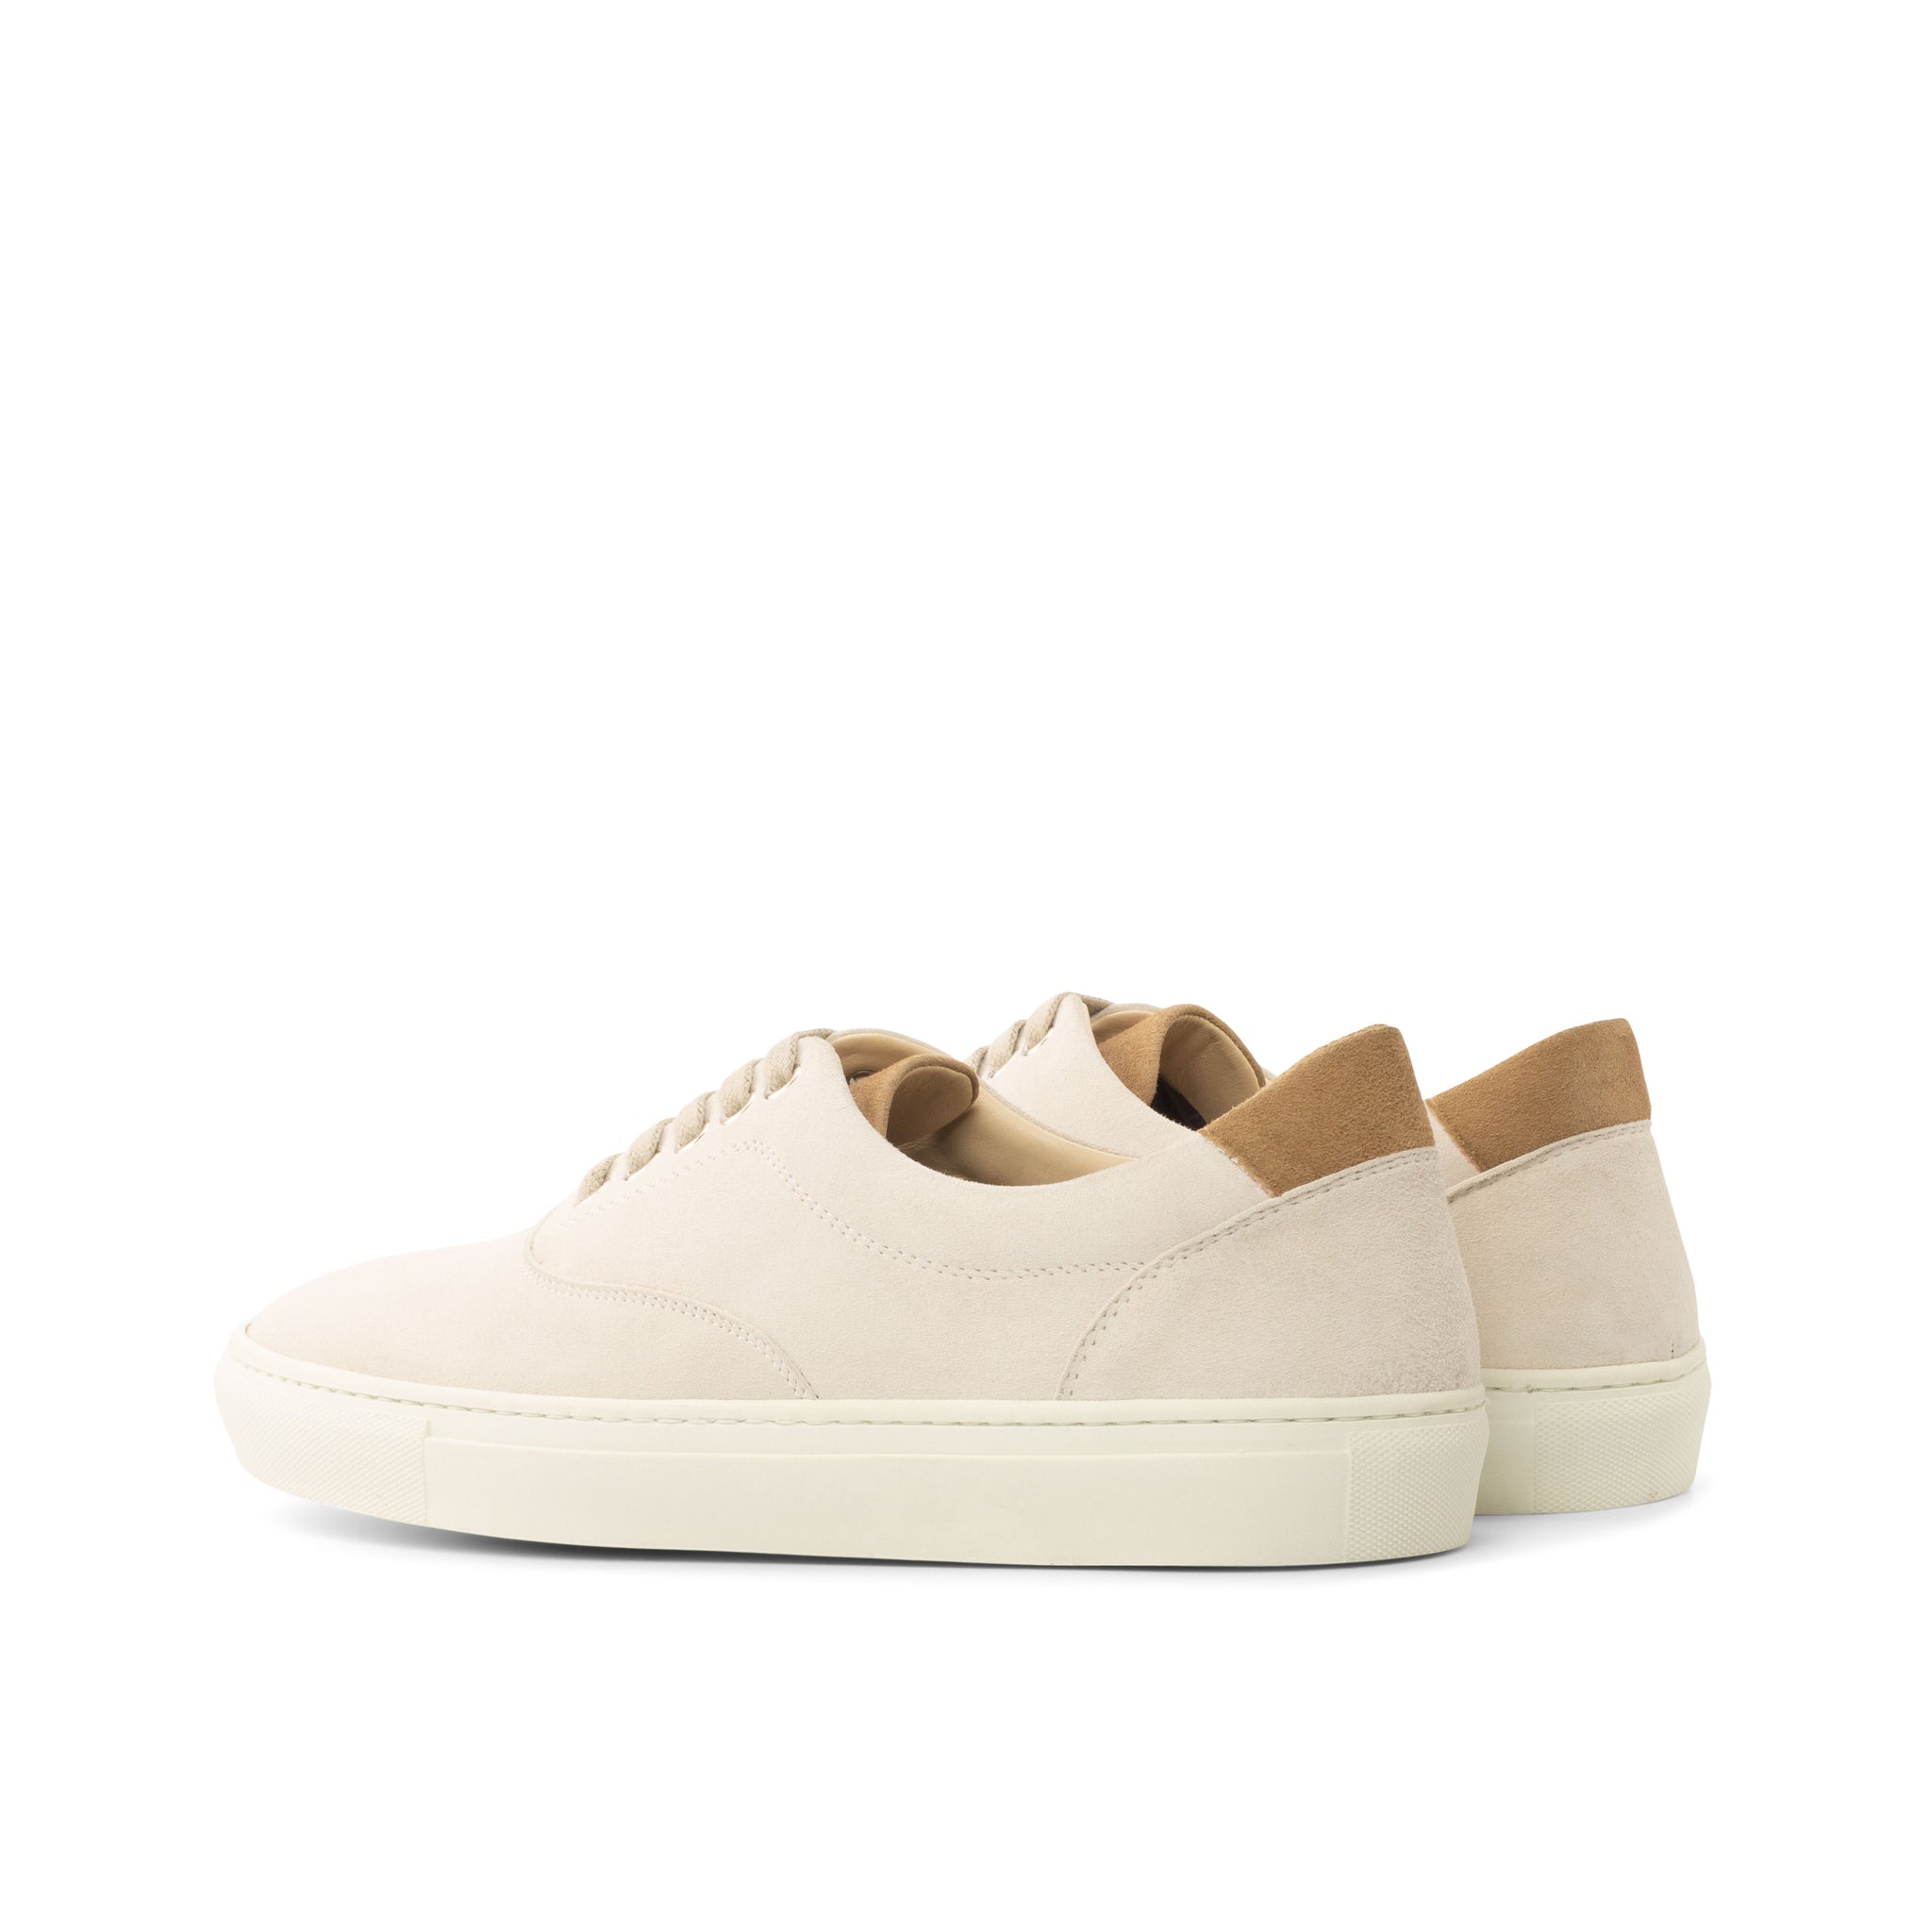 Unique Handcrafted Top Sider Sneaker - Kid Suede White-Kid Suede Camel